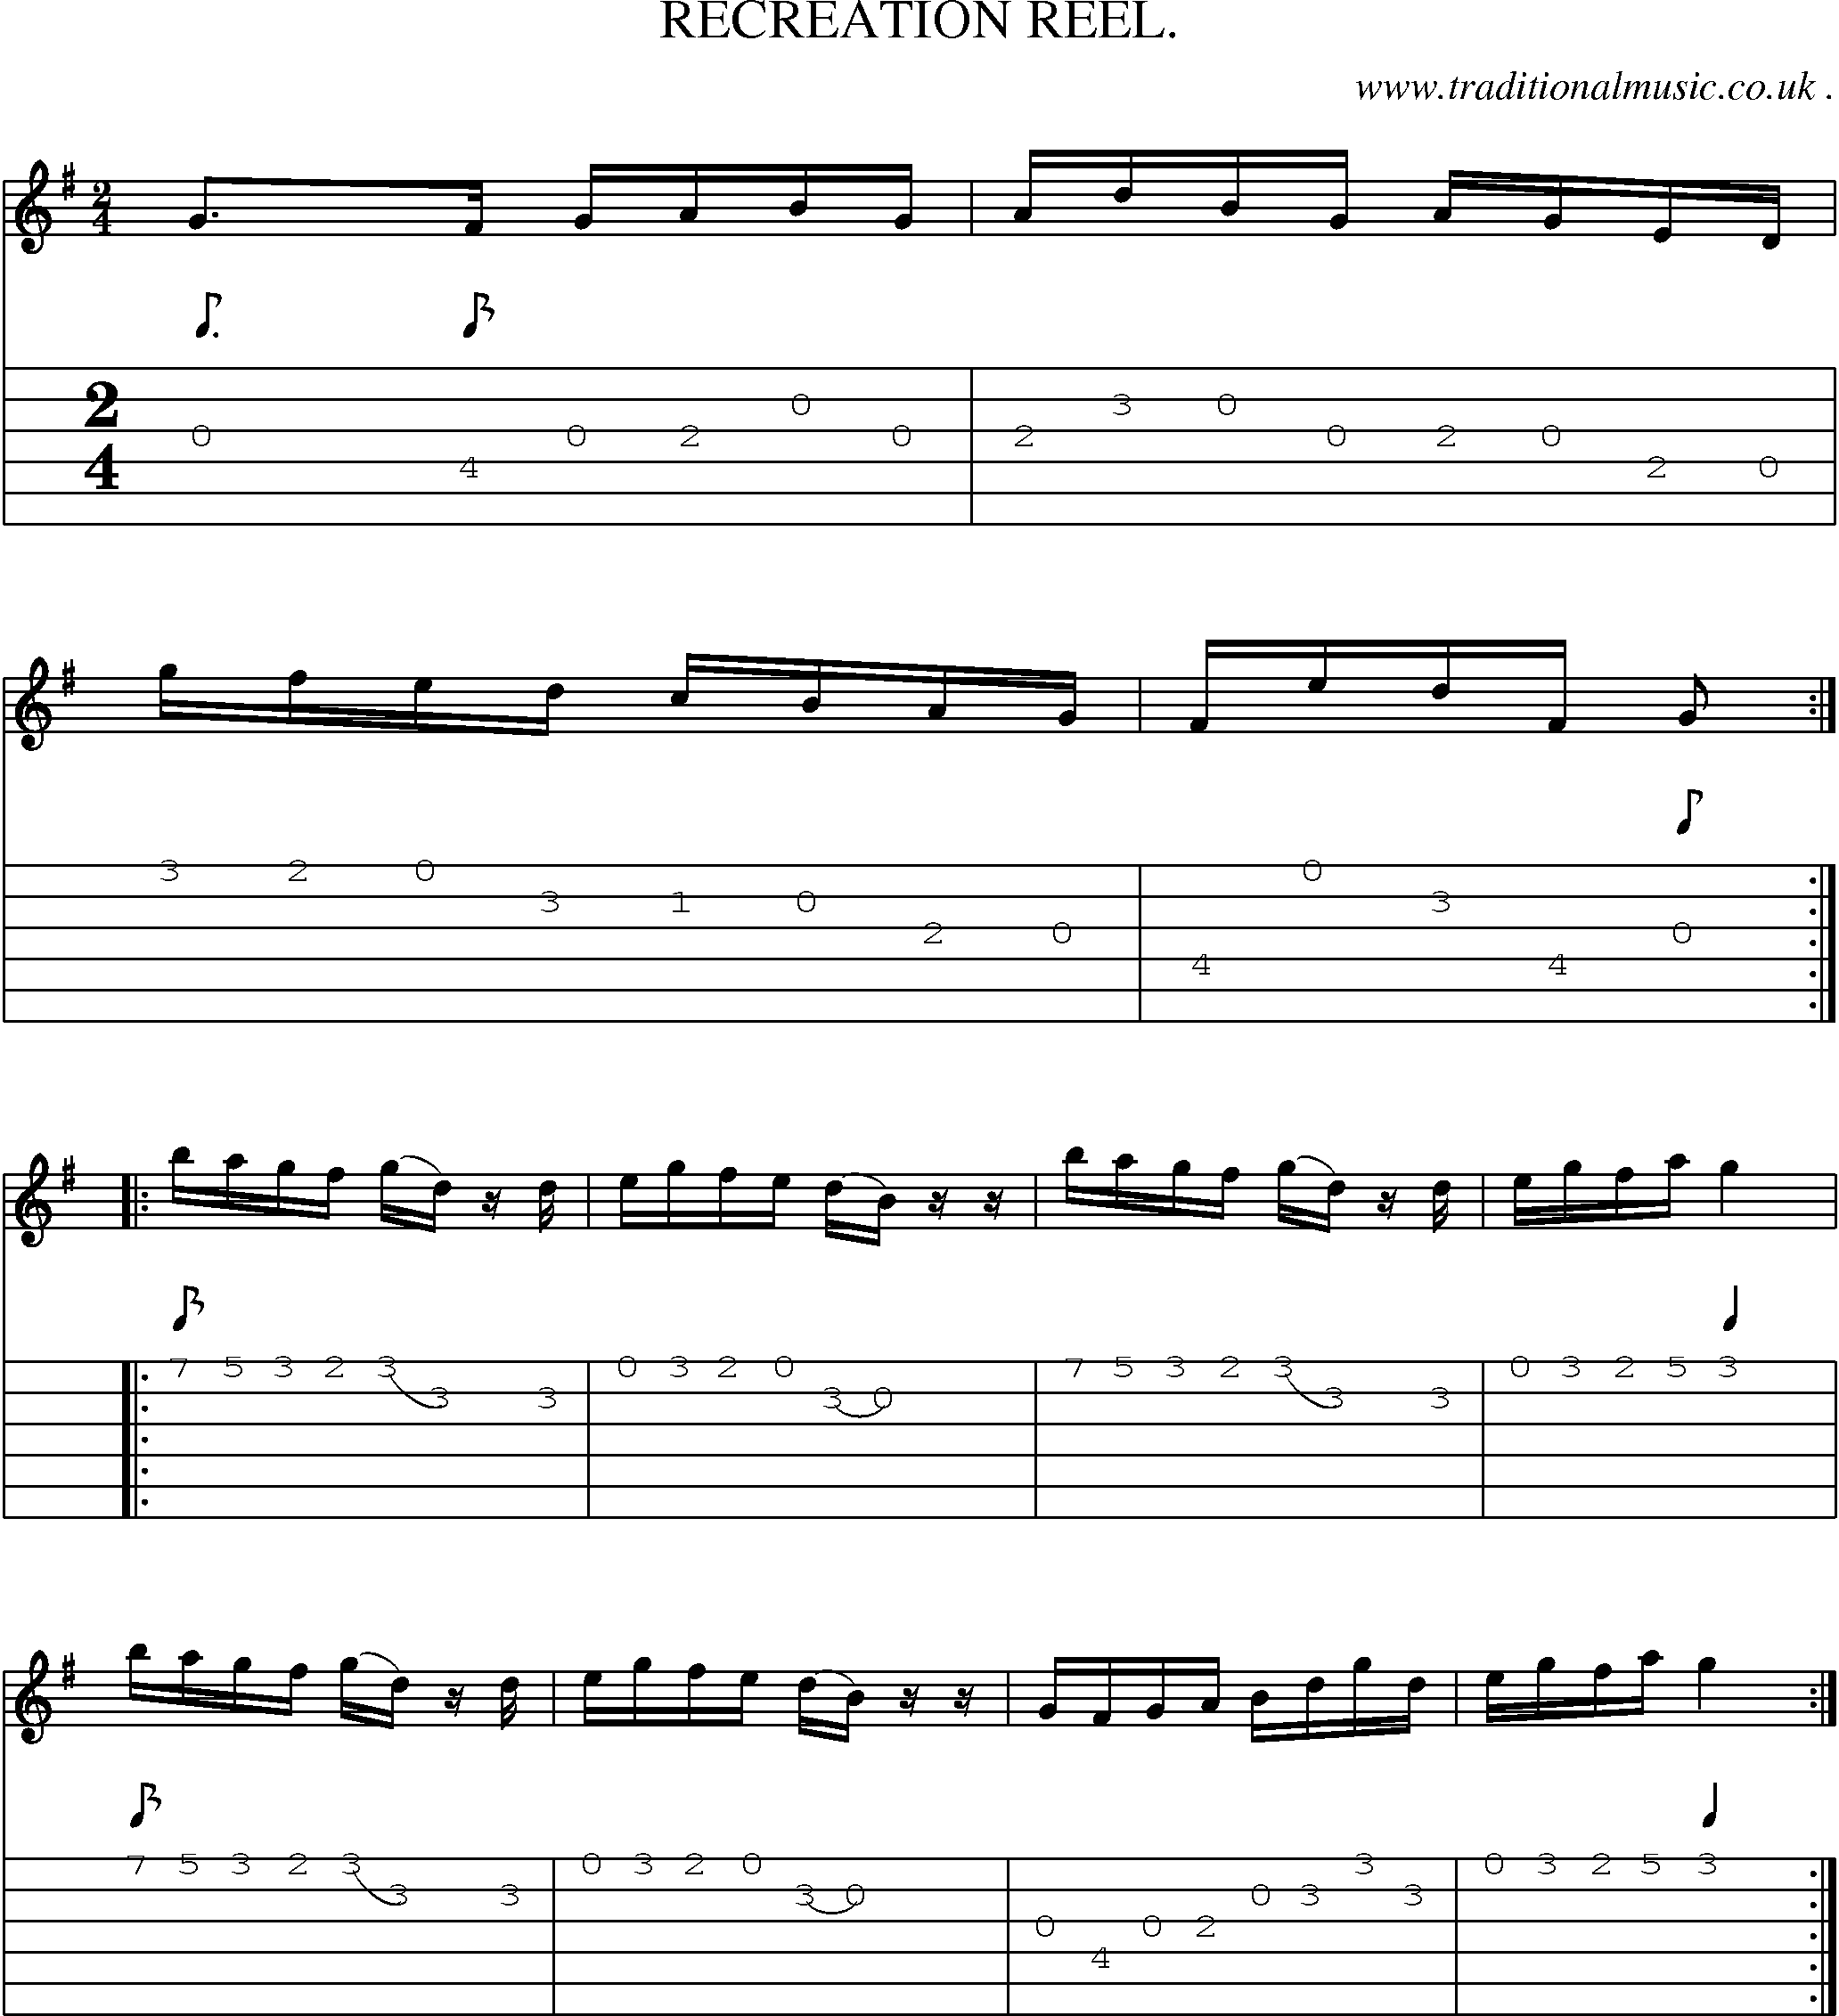 Sheet-Music and Guitar Tabs for Recreation Reel